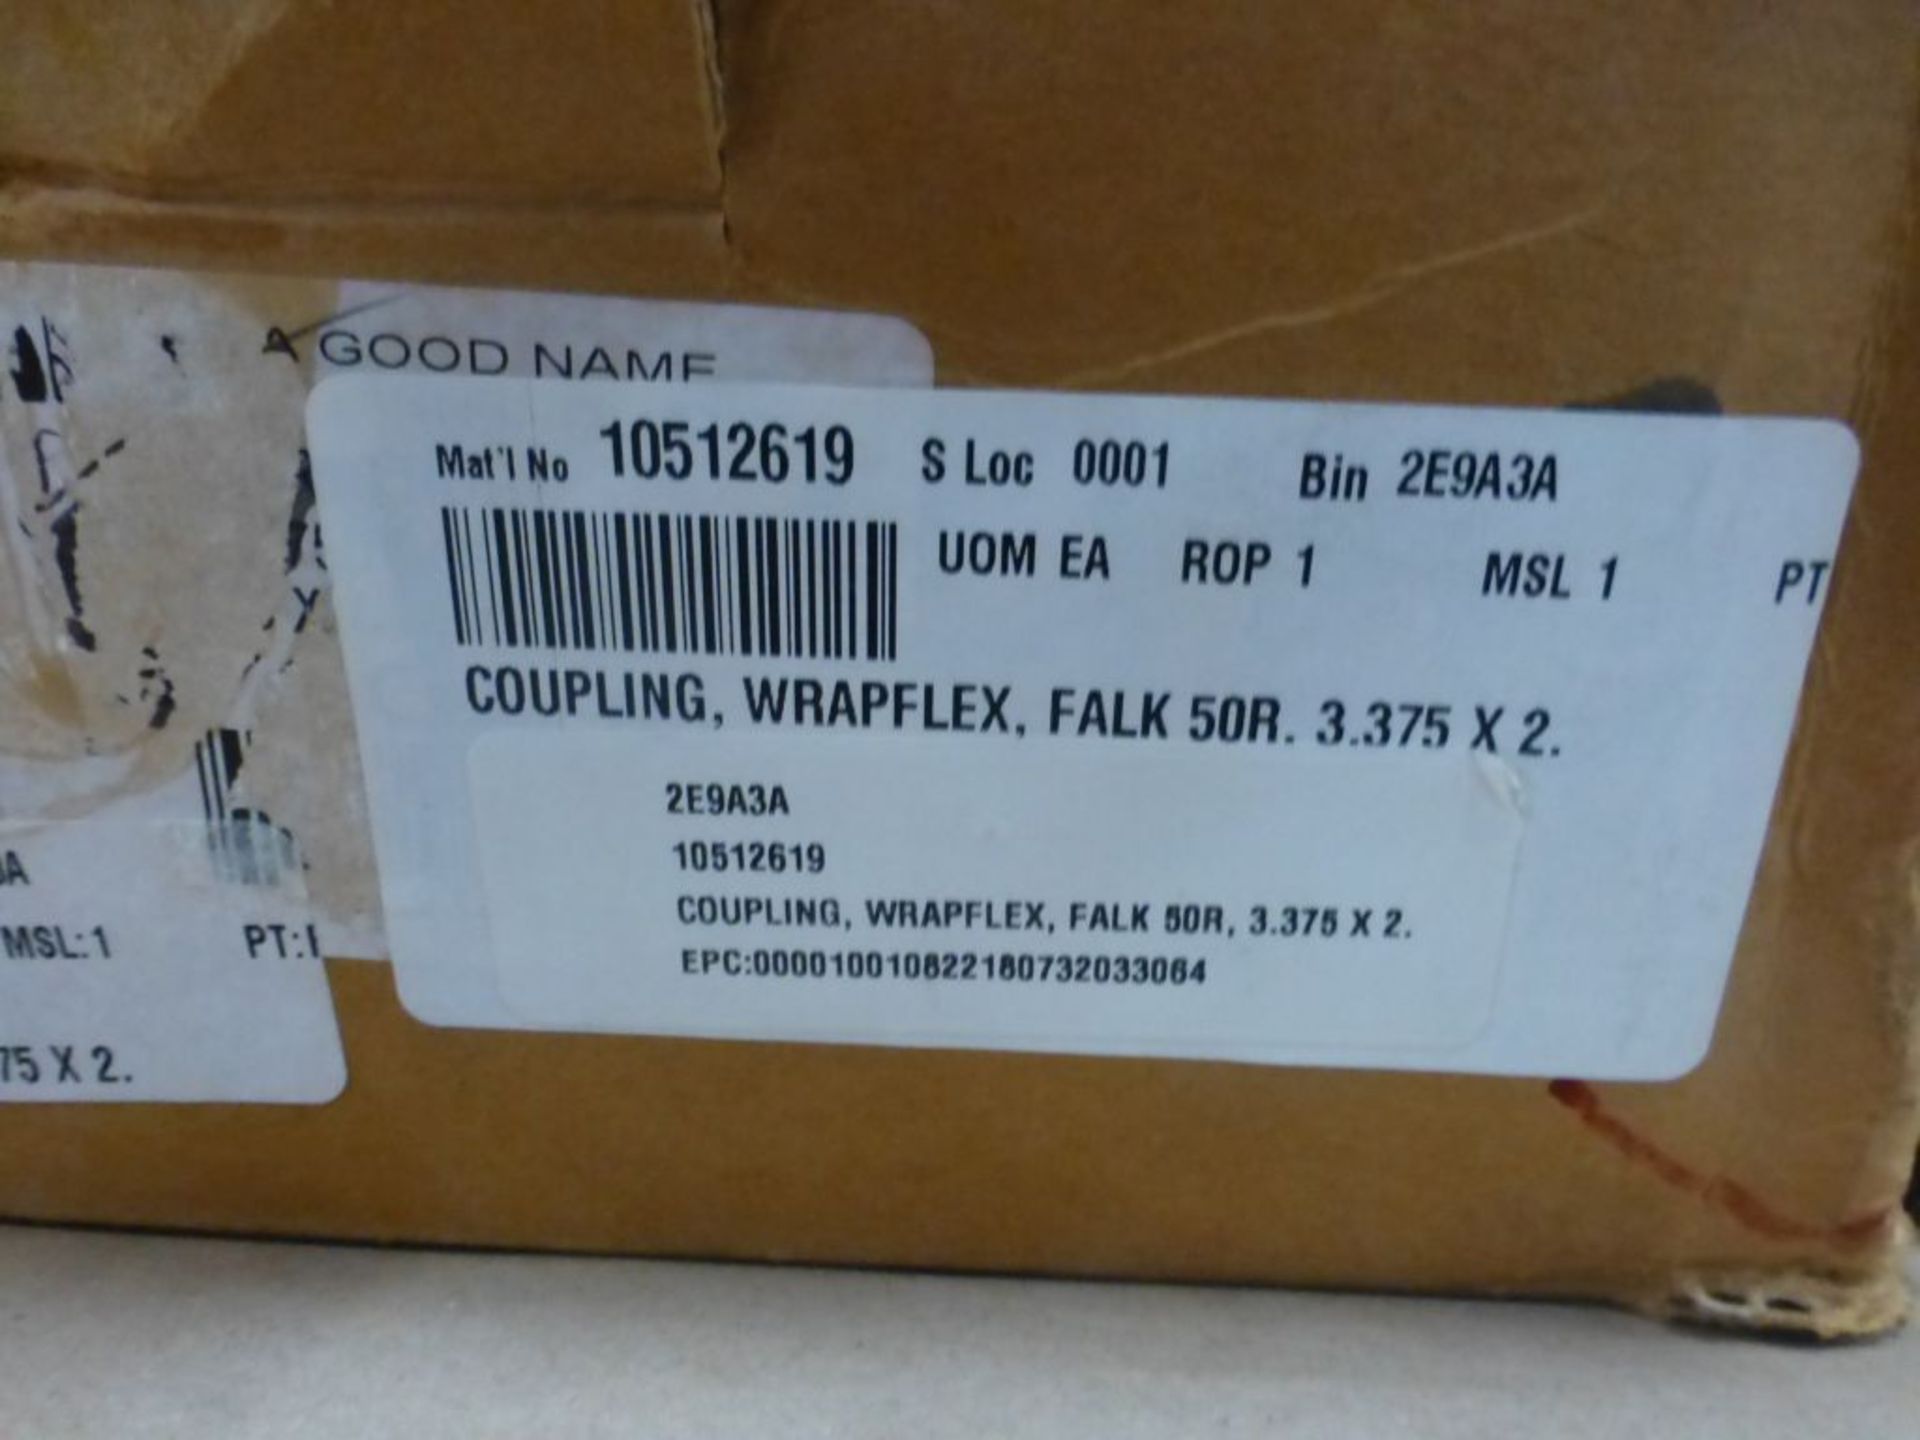 WrapFlex Complete Coupling - Falk 50R; 3.375 x 2; Tag: 216149 - Image 7 of 8